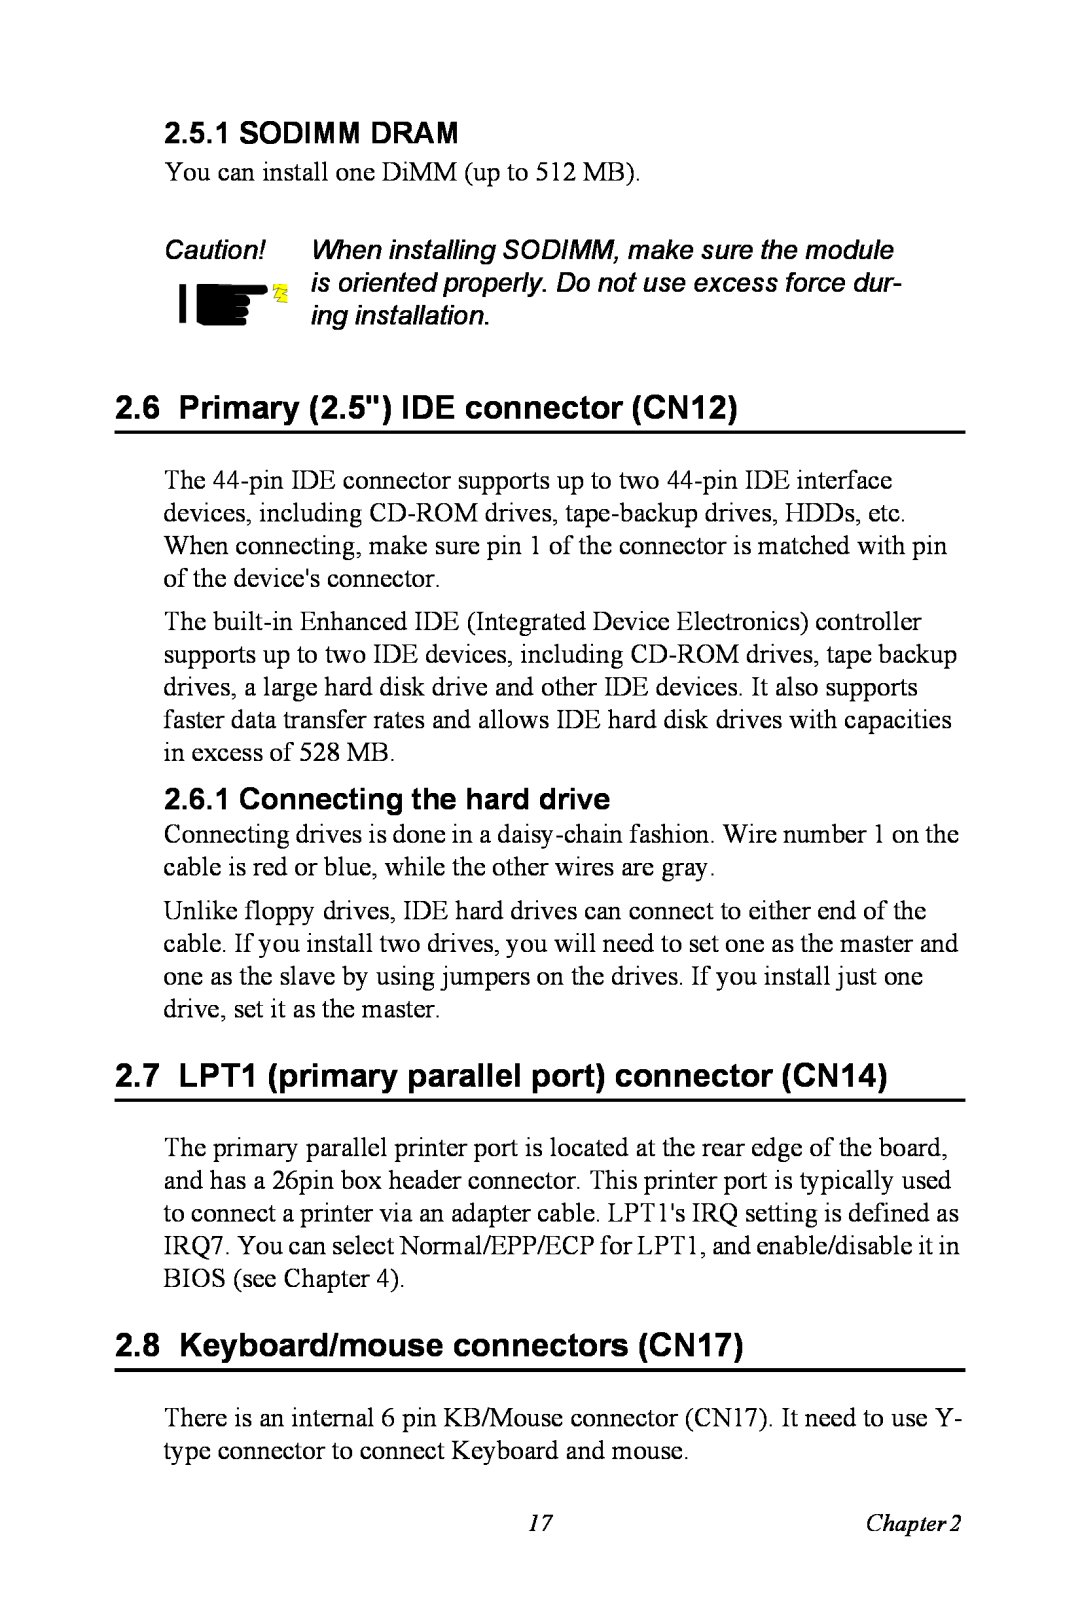 Intel PCM-3370 user manual Primary 2.5 IDE connector CN12, 2.7 LPT1 primary parallel port connector CN14, Sodimm Dram 